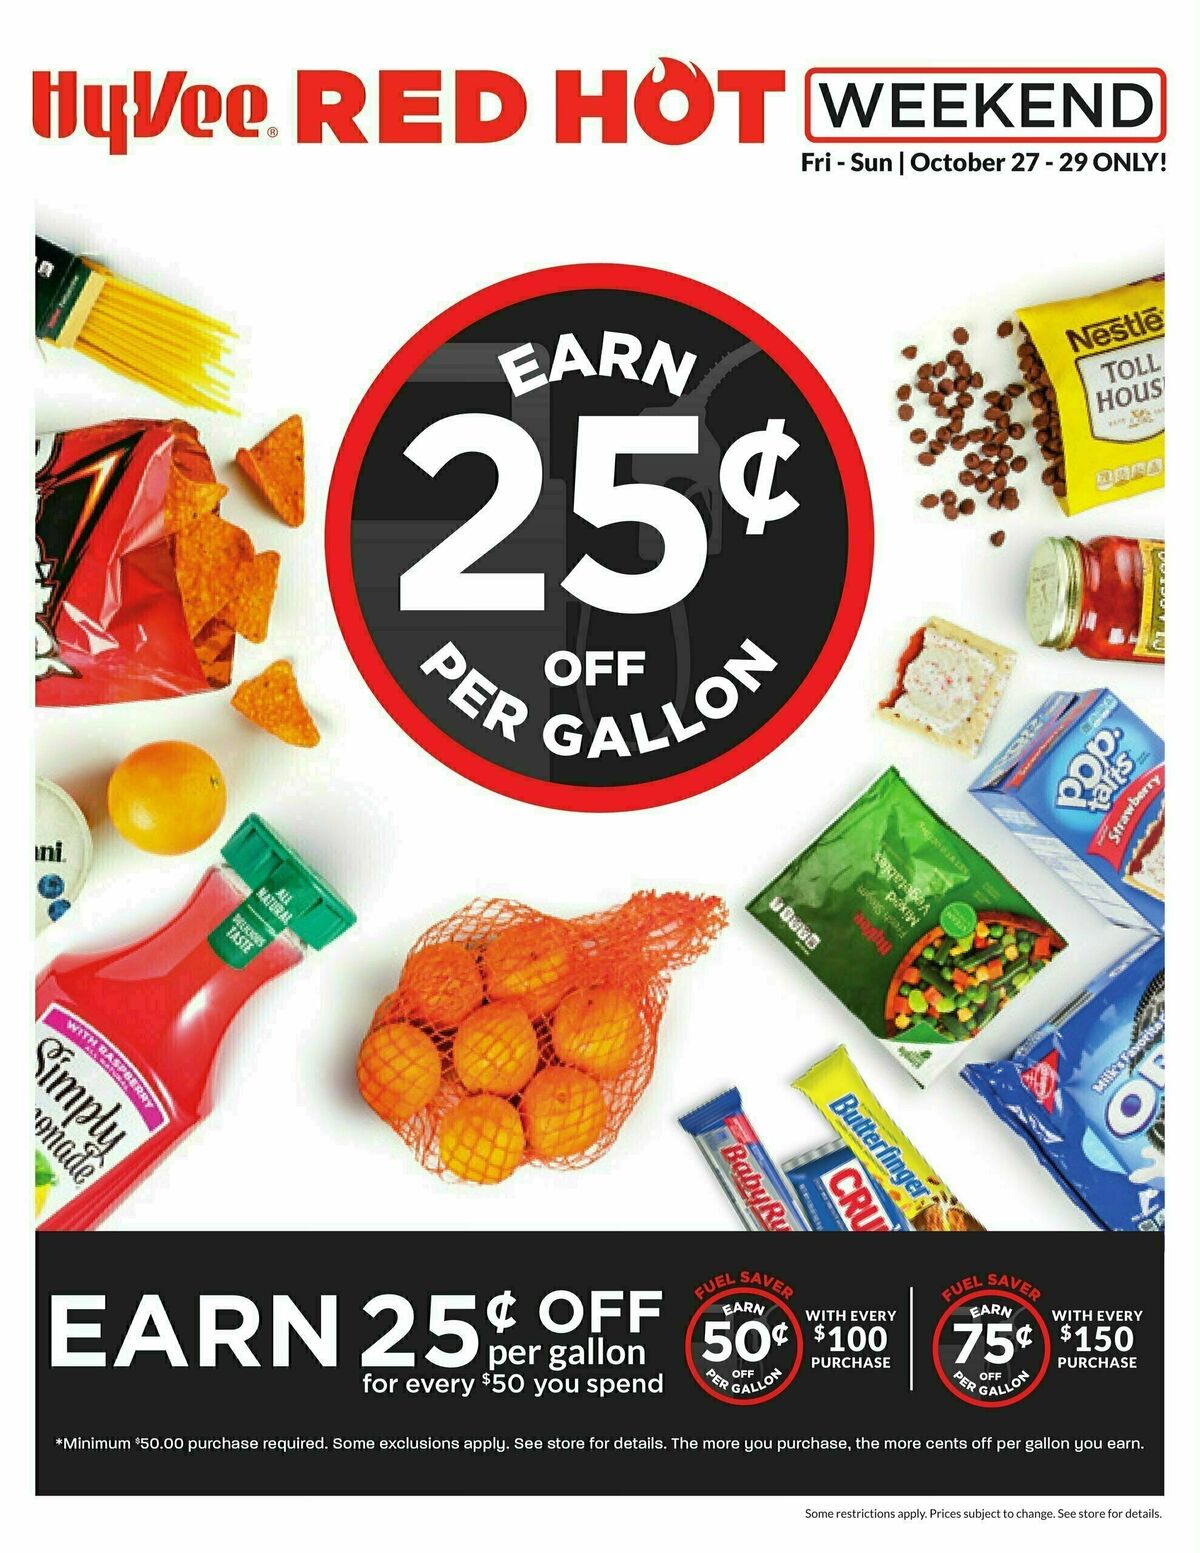 HyVee Red Hot Weekend Deals & Ads from October 27